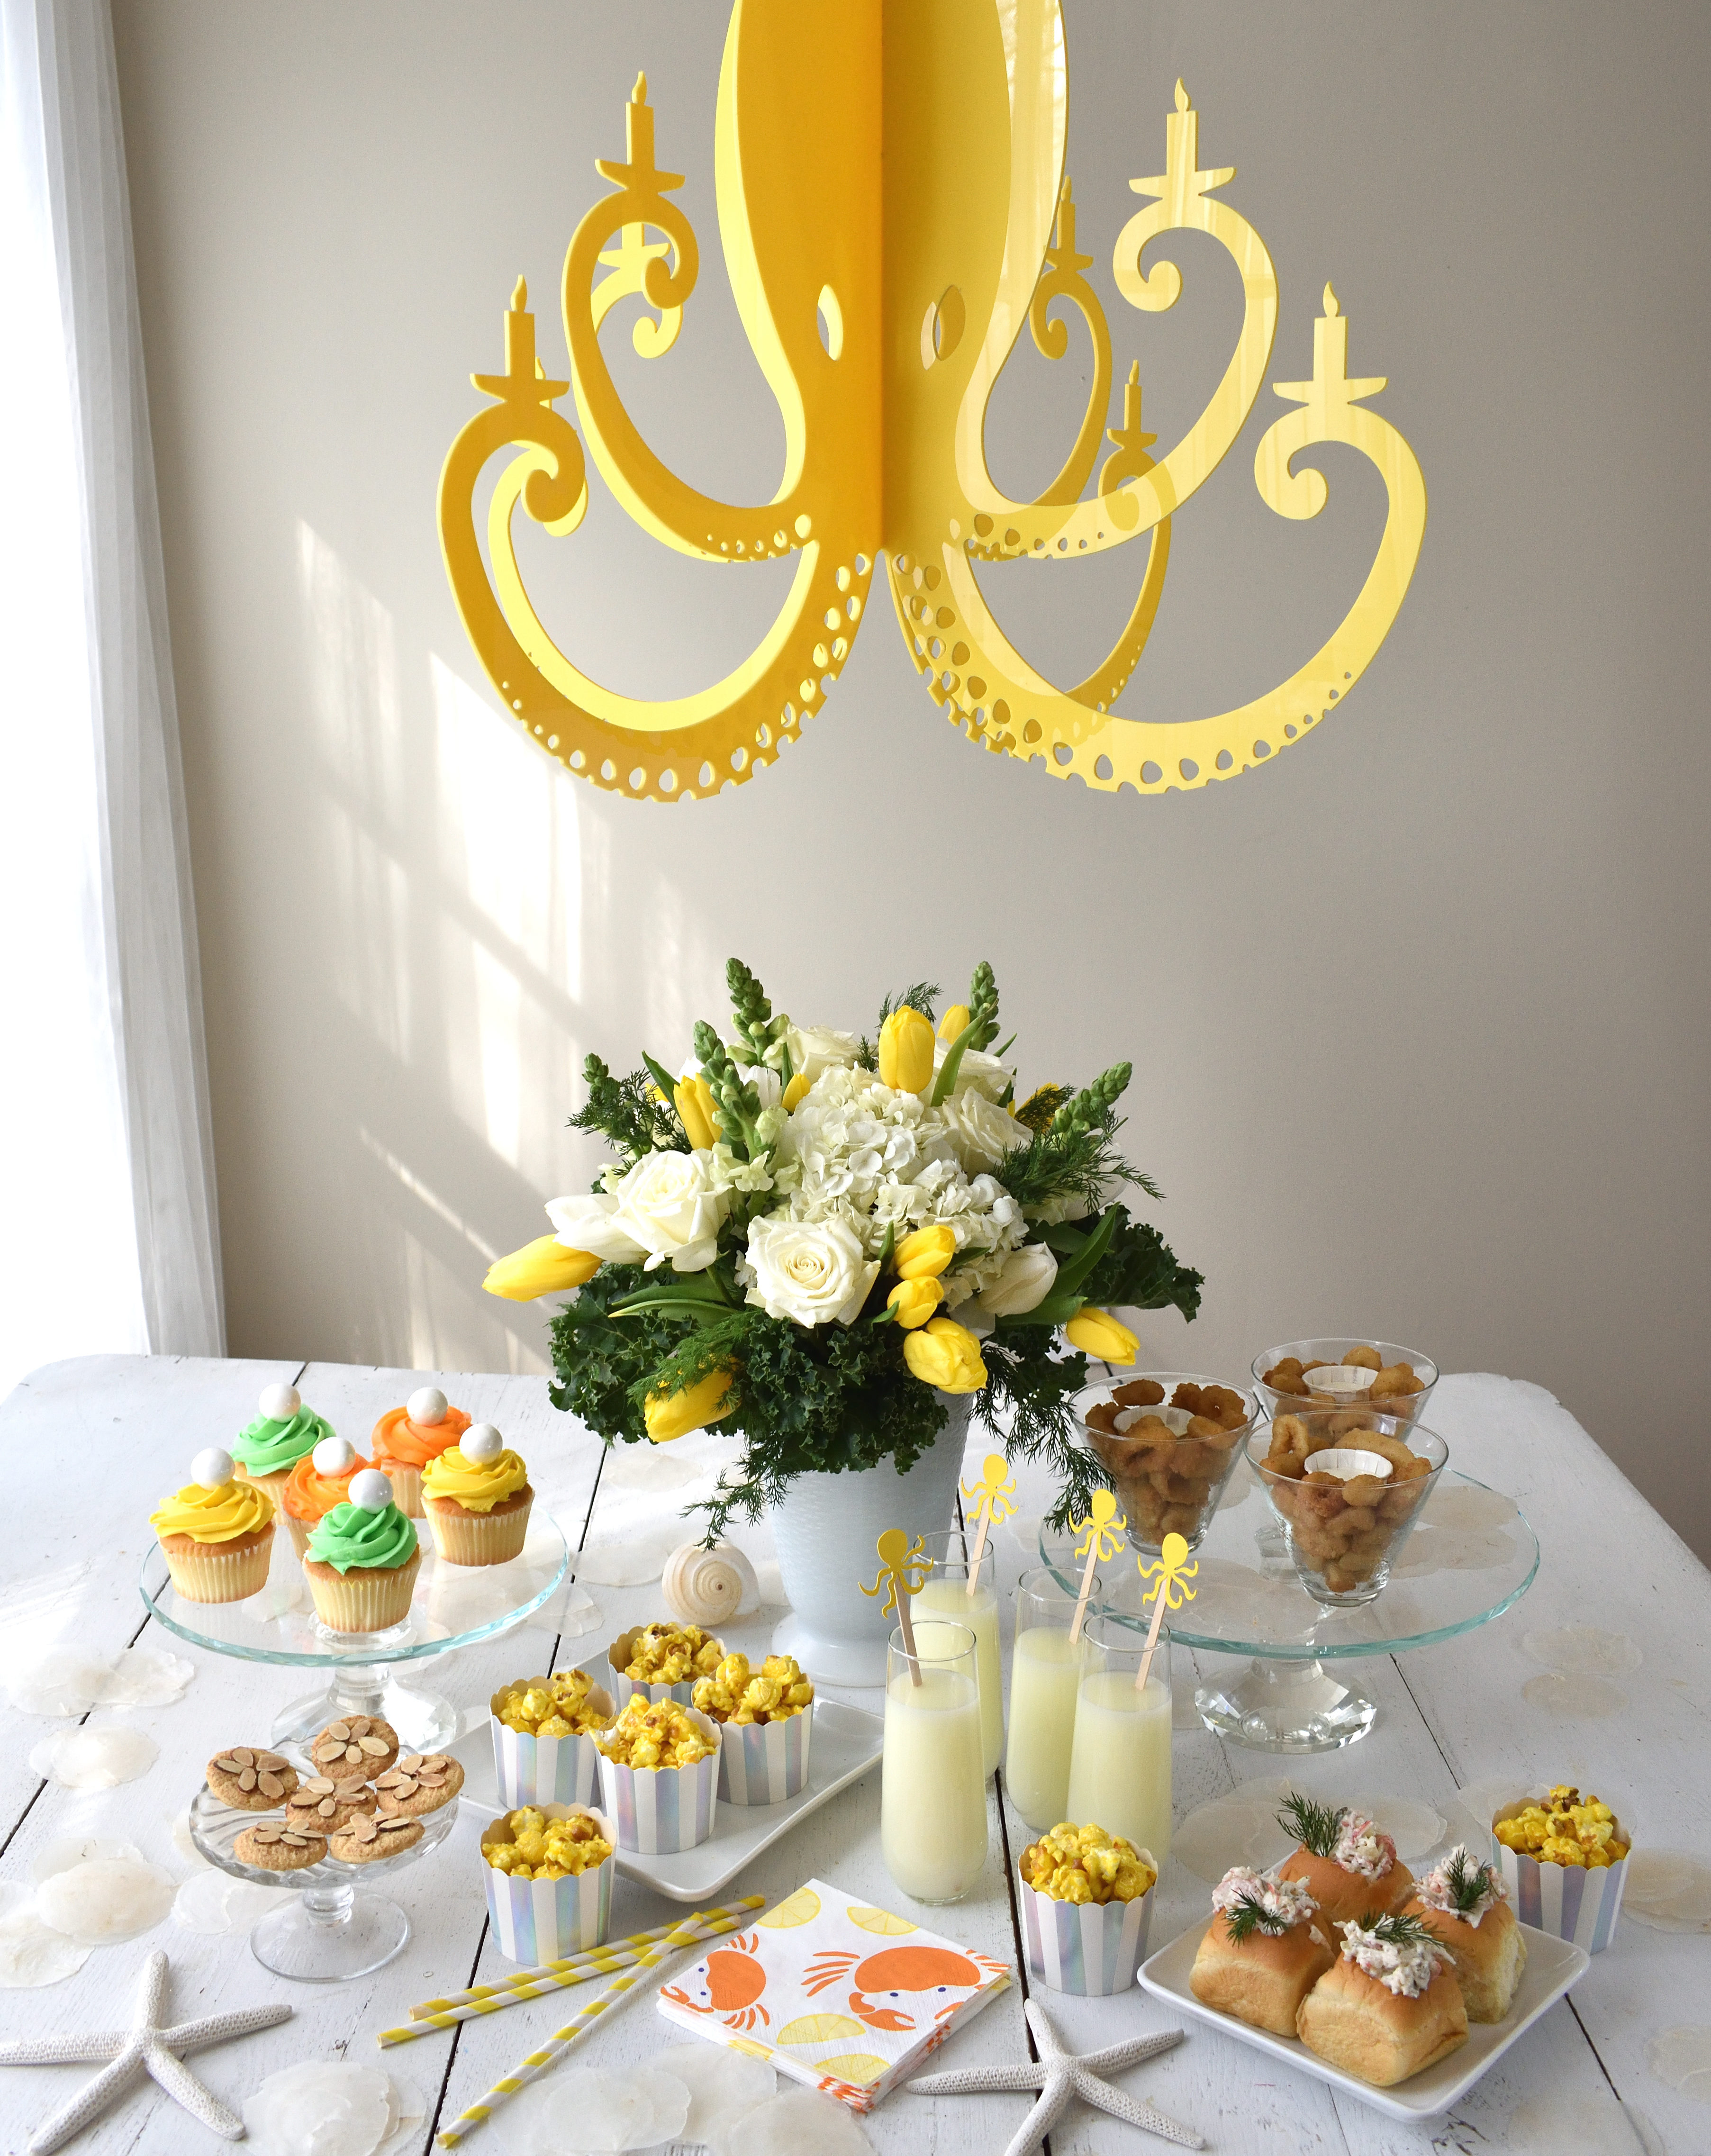 Under the Sea Party Ideas with a fun and easy twist!